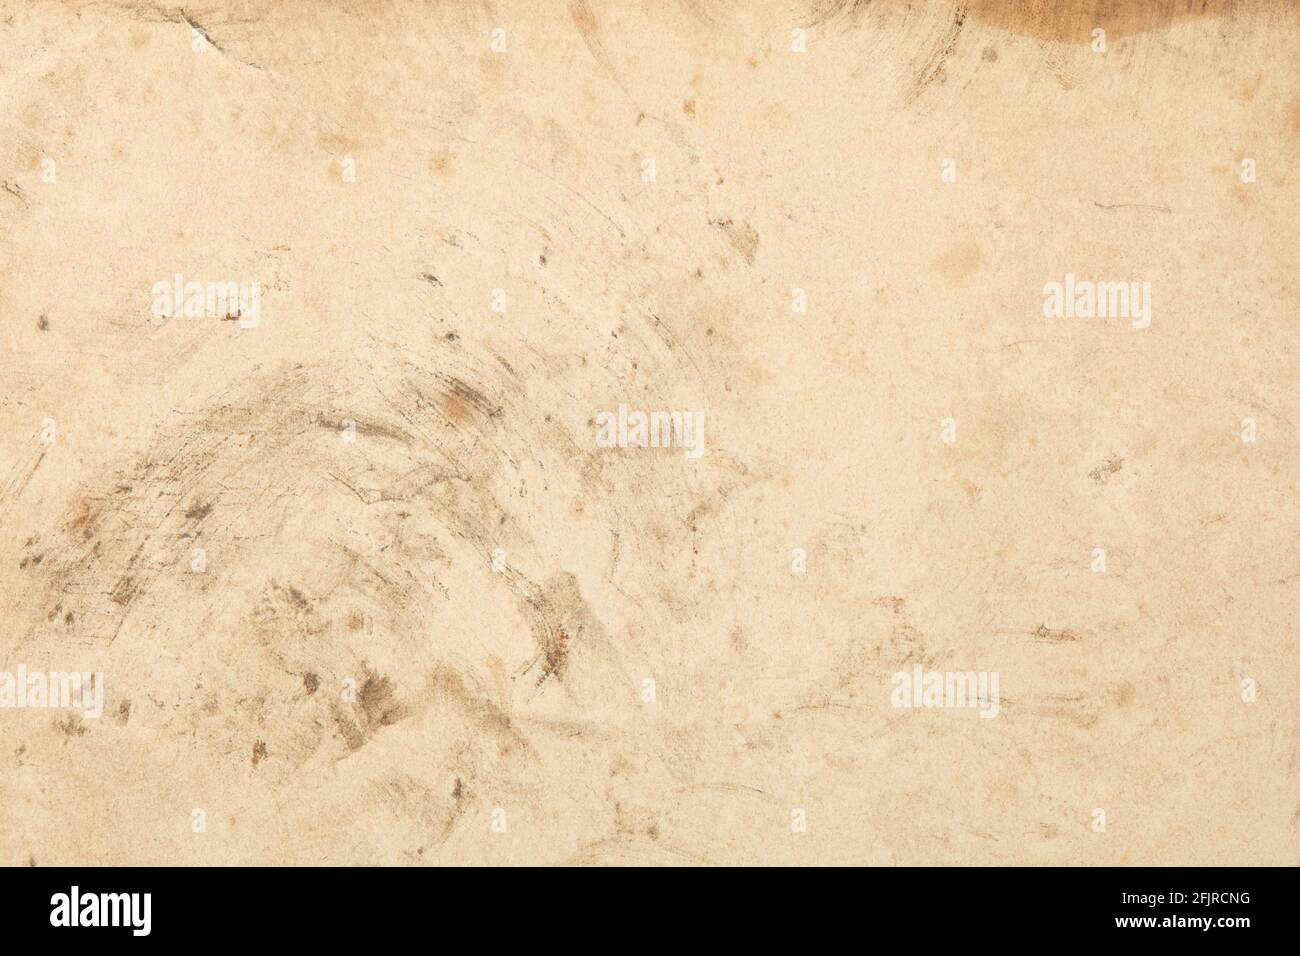 Old paper with black stains and signs texture background Stock Photo